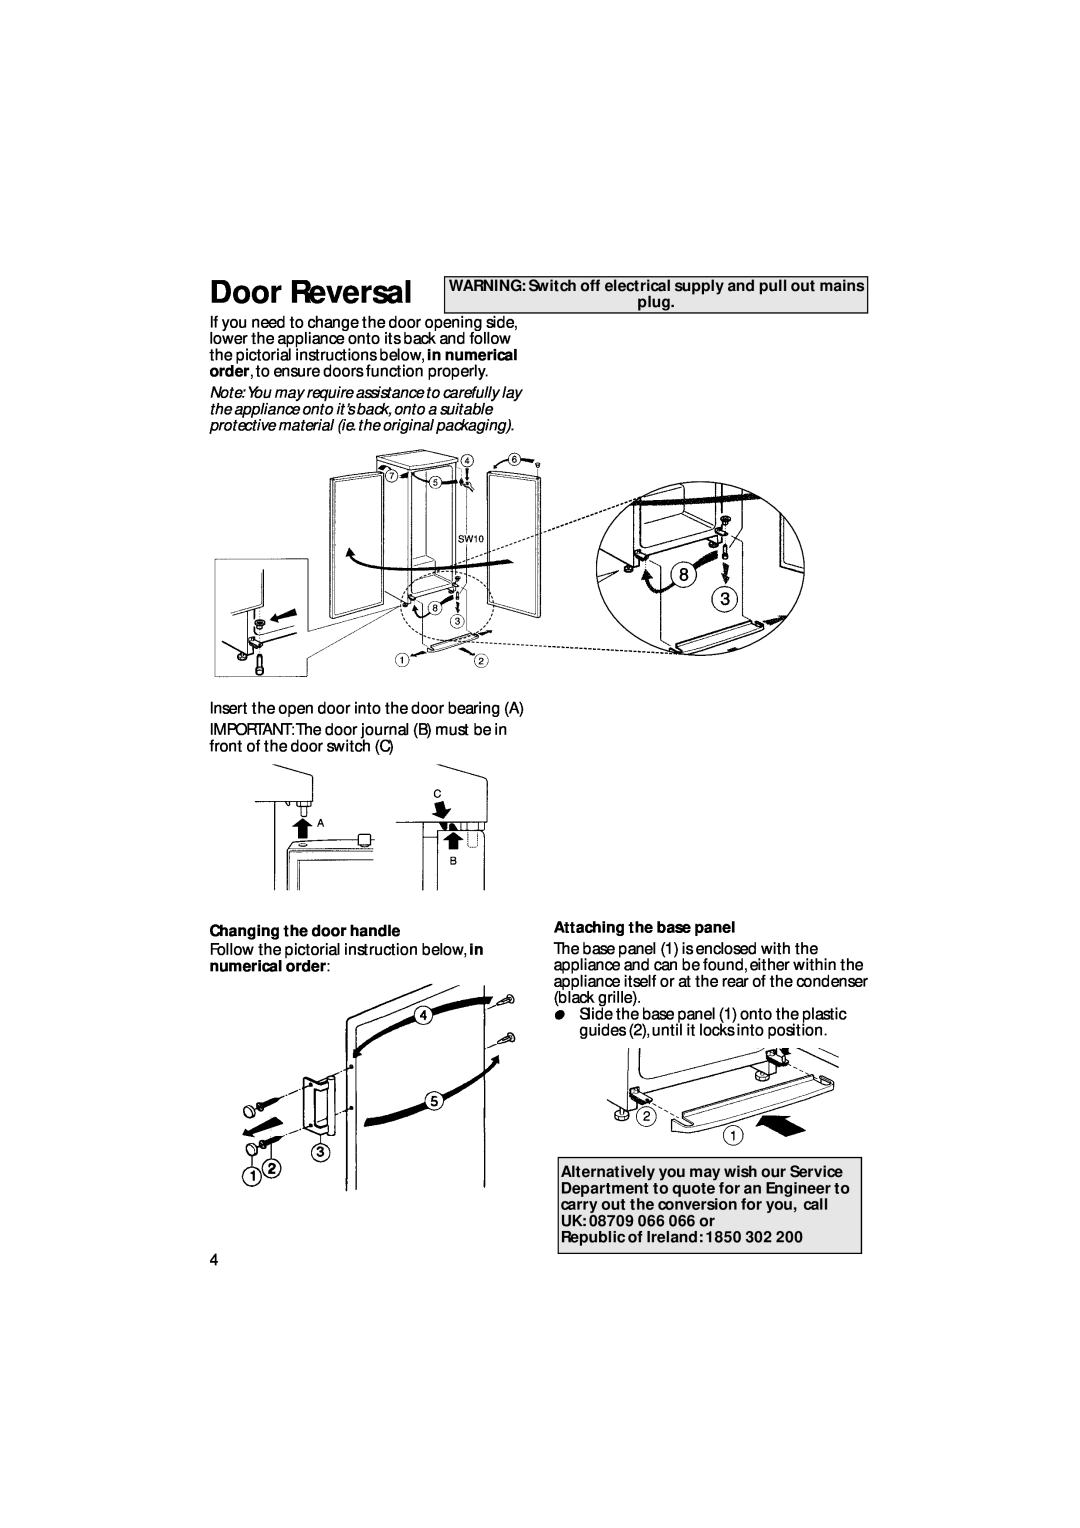 Hotpoint FZ92P manual Door Reversal, WARNING Switch off electrical supply and pull out mains plug, Changing the door handle 